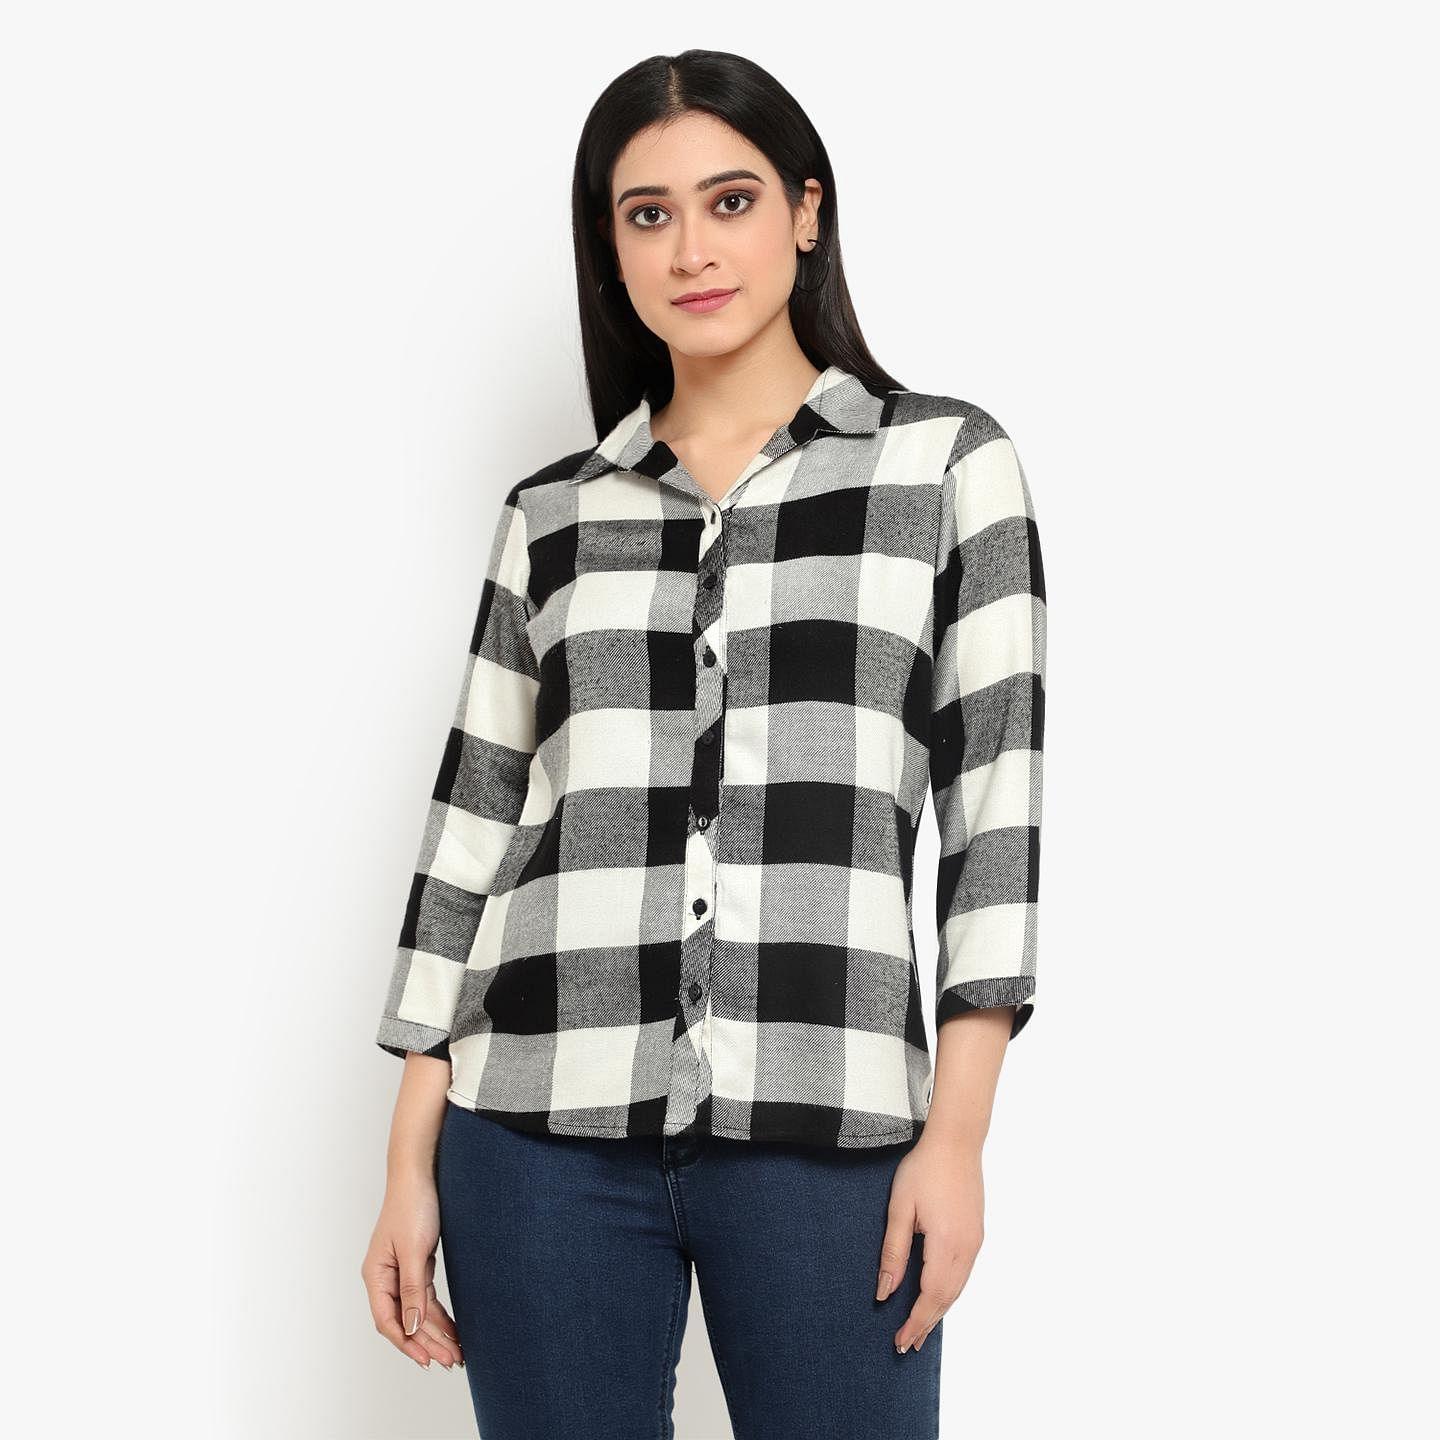 Ayaany - Black Colored Casual Cotton Shirt - Peachmode